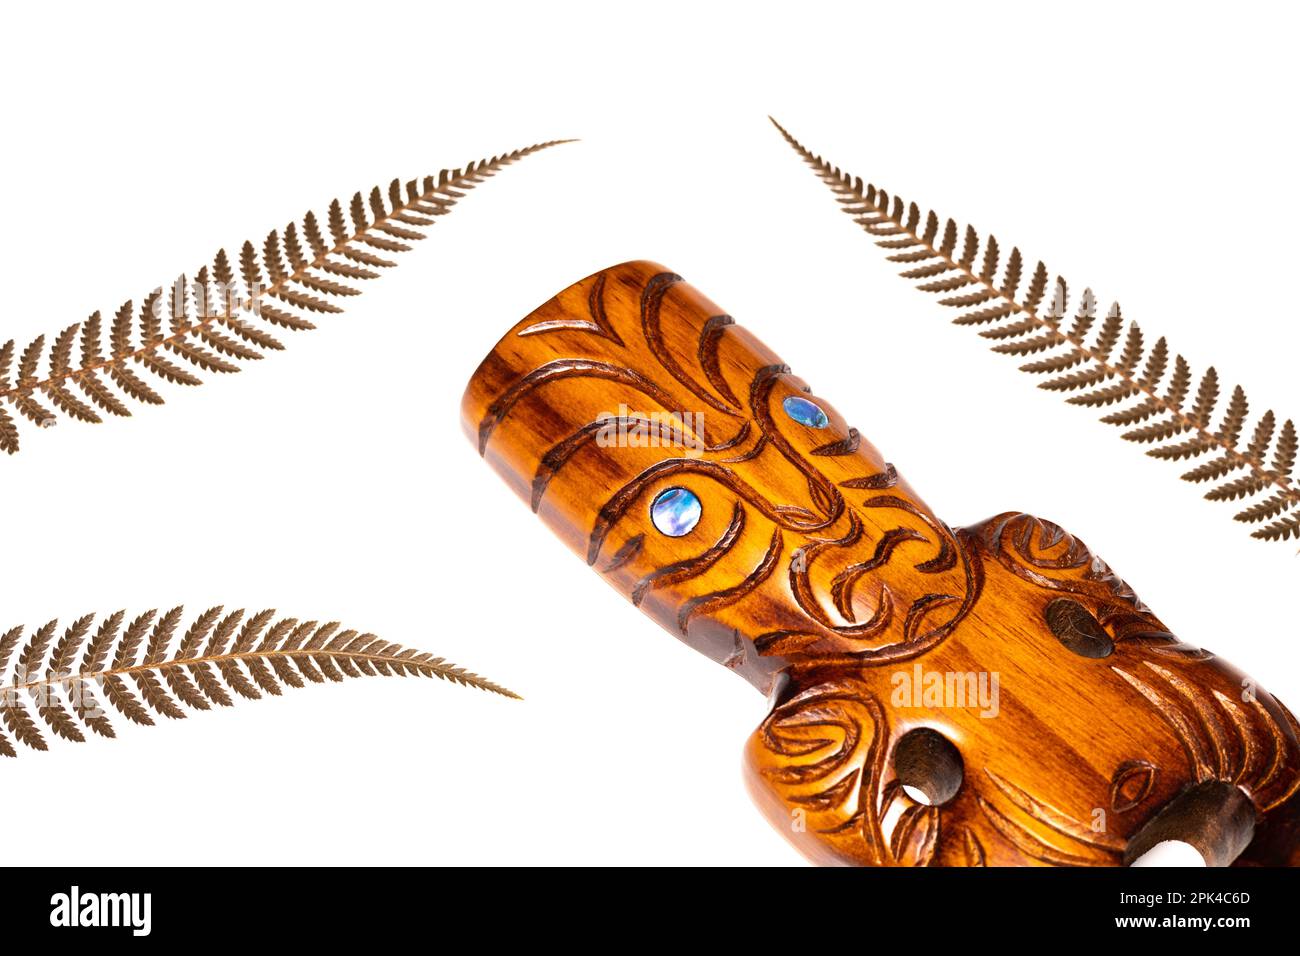 New zealand symbol, traditional maori carving and silver fern leaves, white background, close up Stock Photo